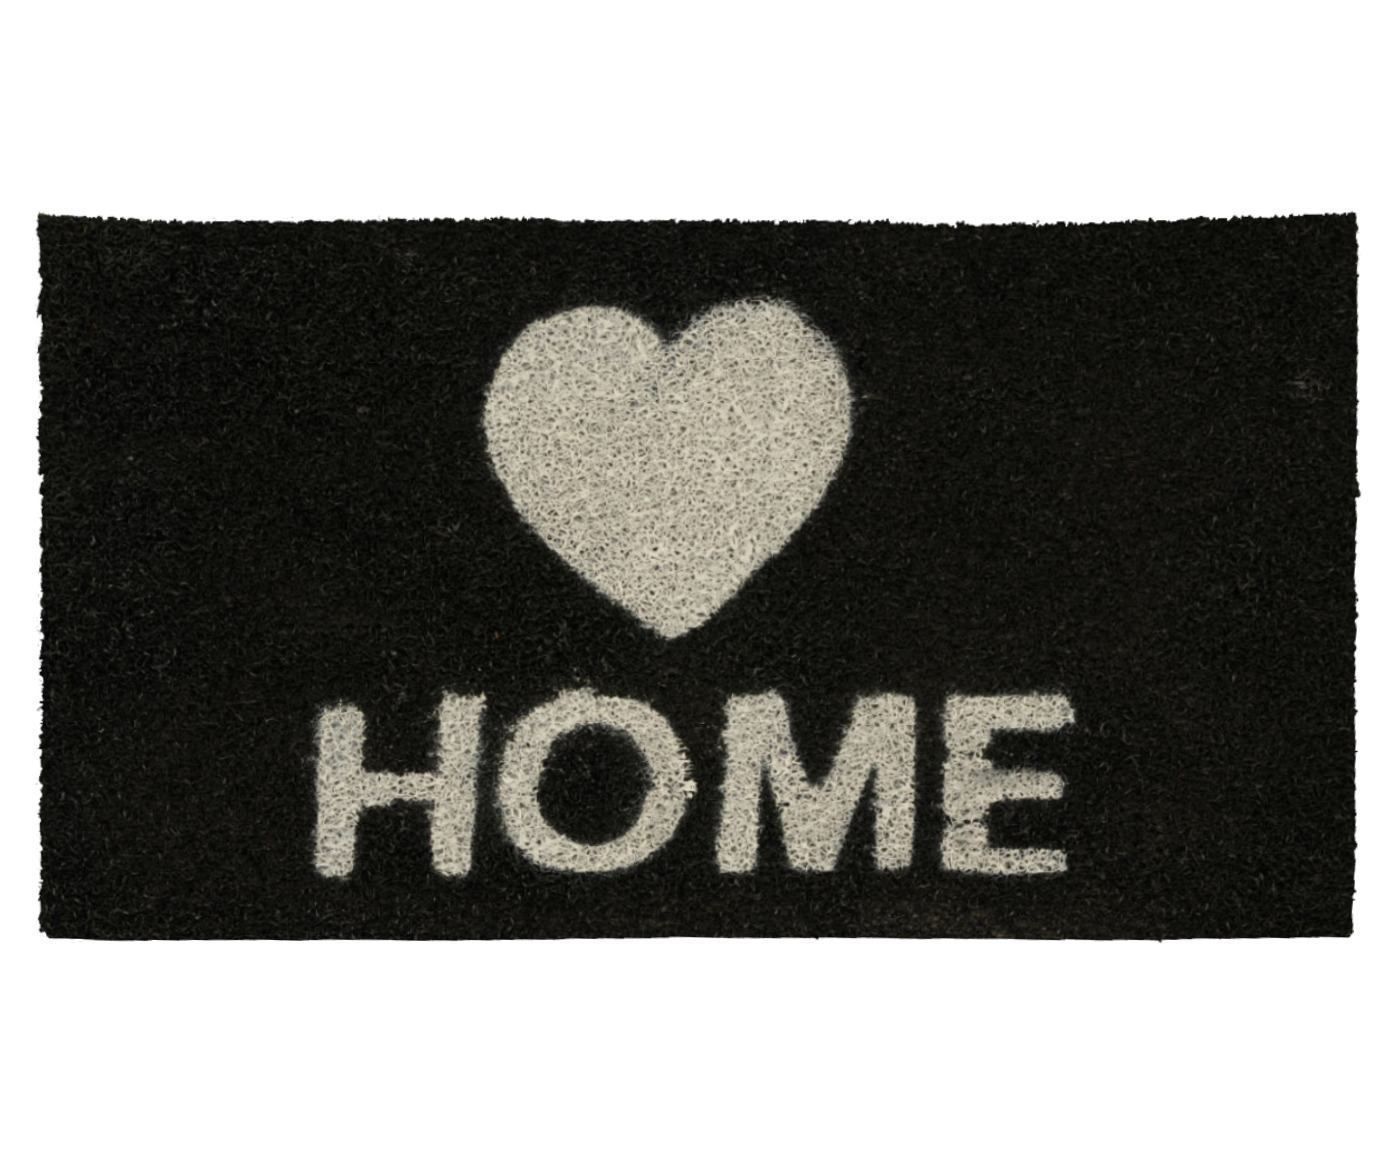 Capacho home nuit - 40x70cm | Westwing.com.br